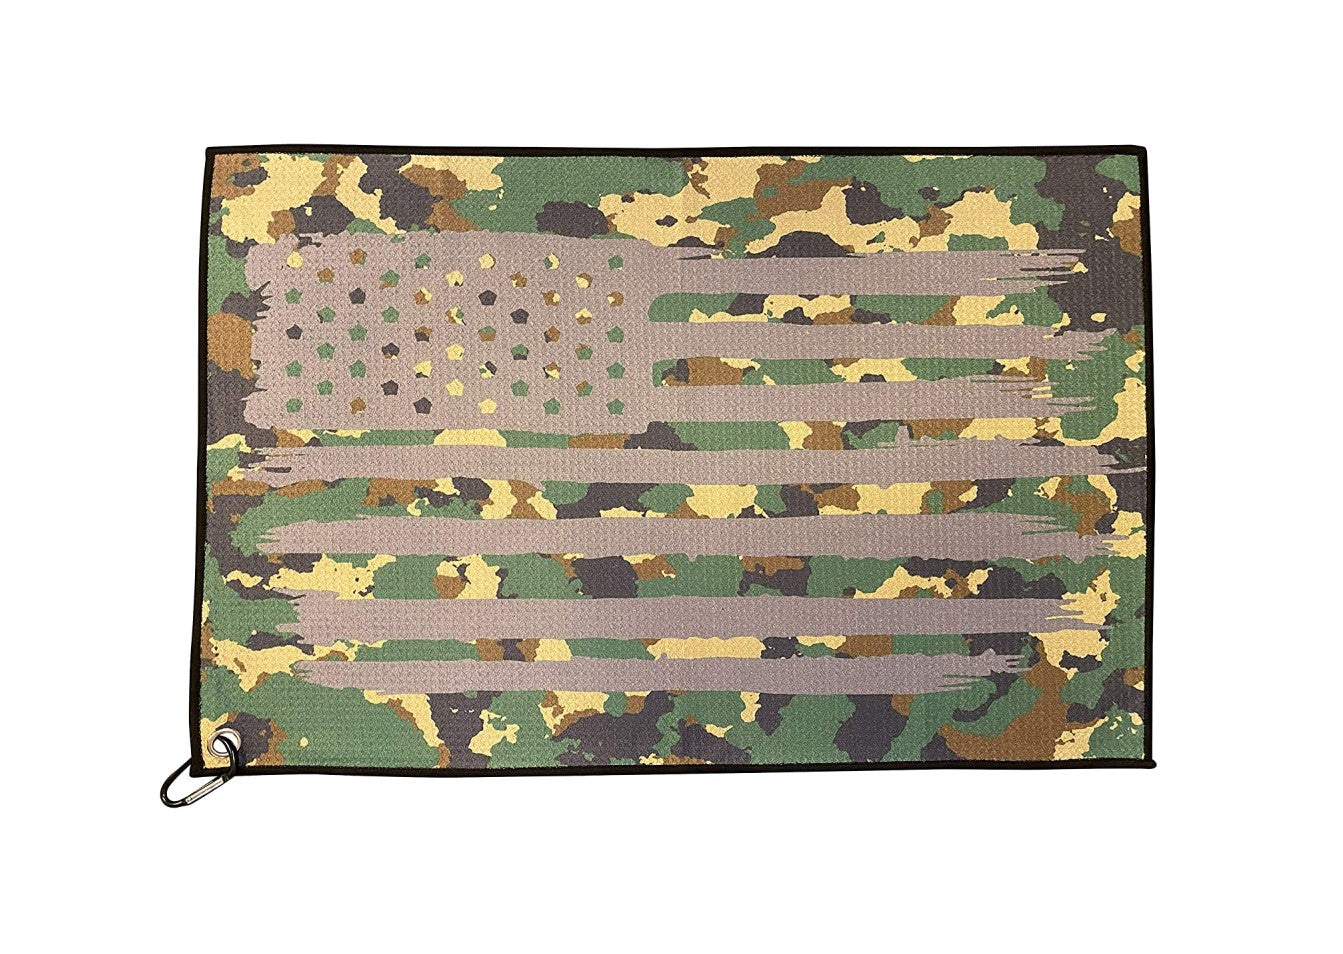 Microfiber Golf Towels -  Military Camo Golf Towel with Carabiner Clip - Cool Gift Idea